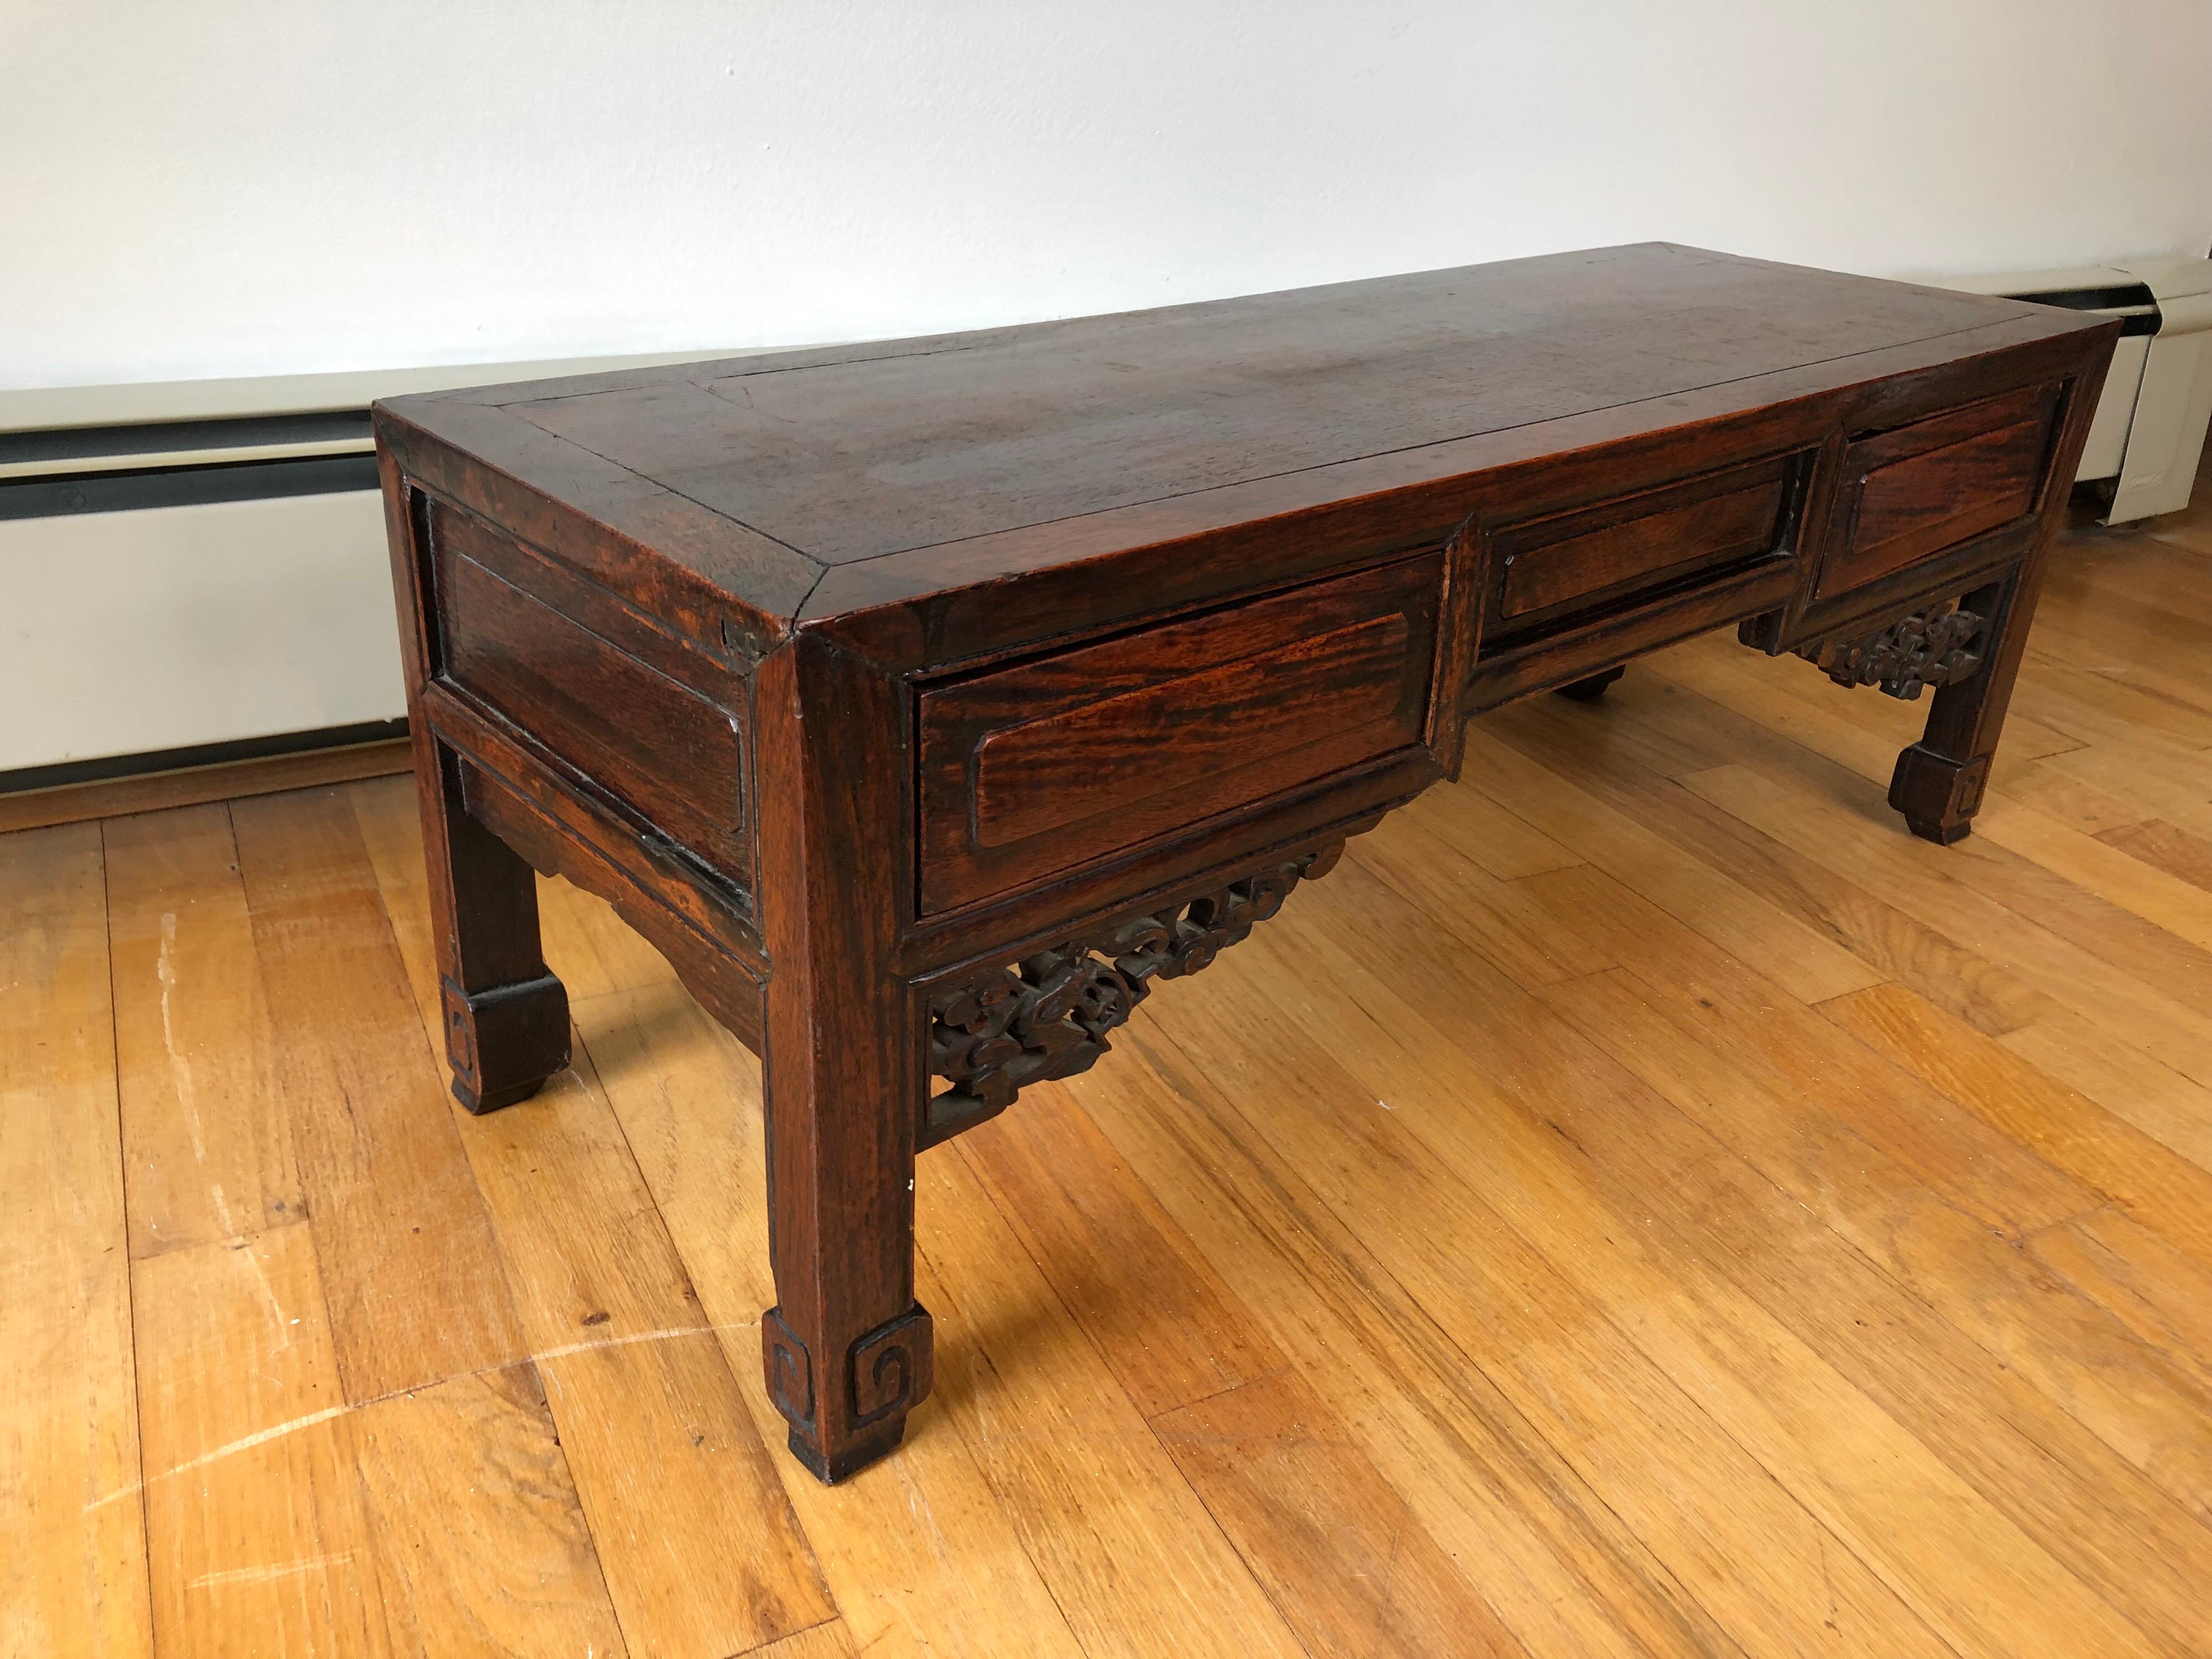 An early 20th century Chinese low table with two drawers and carved brackets.